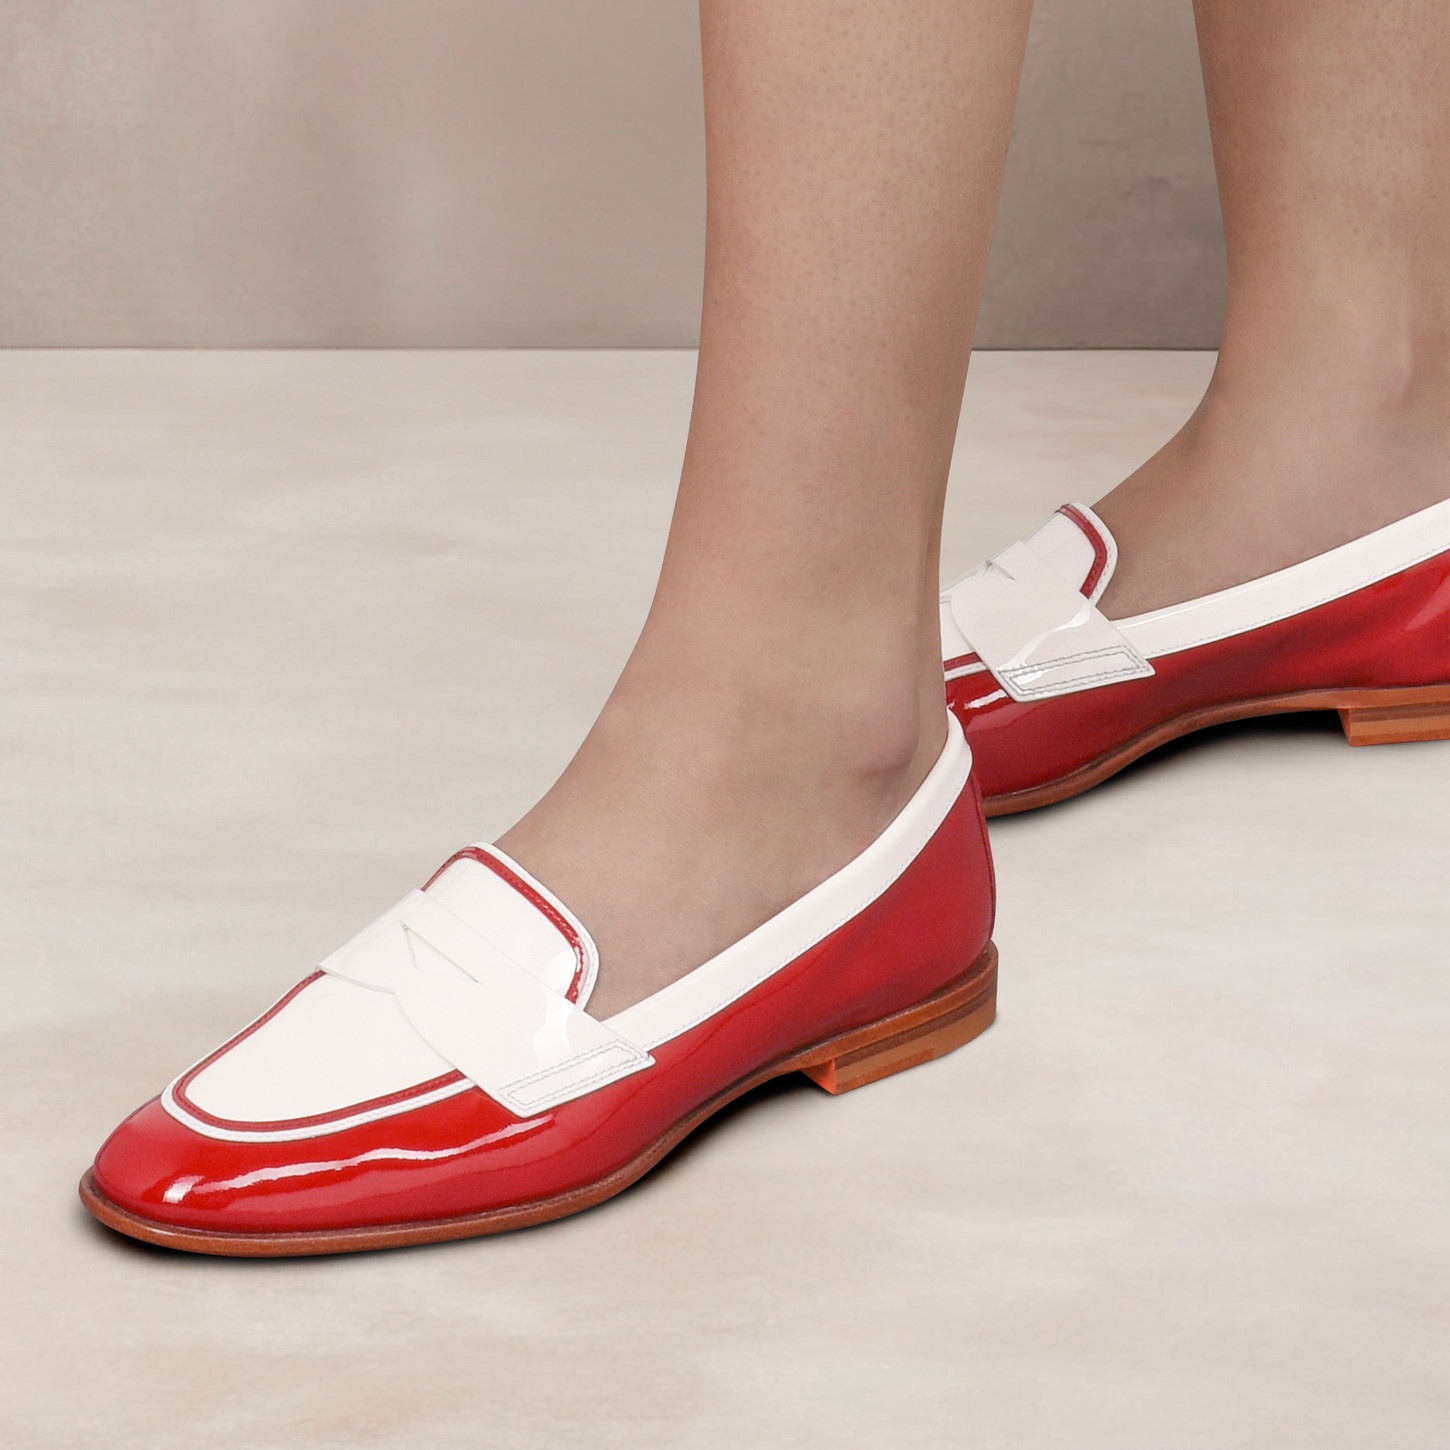 Women's red and white patent leather penny loafer - 2